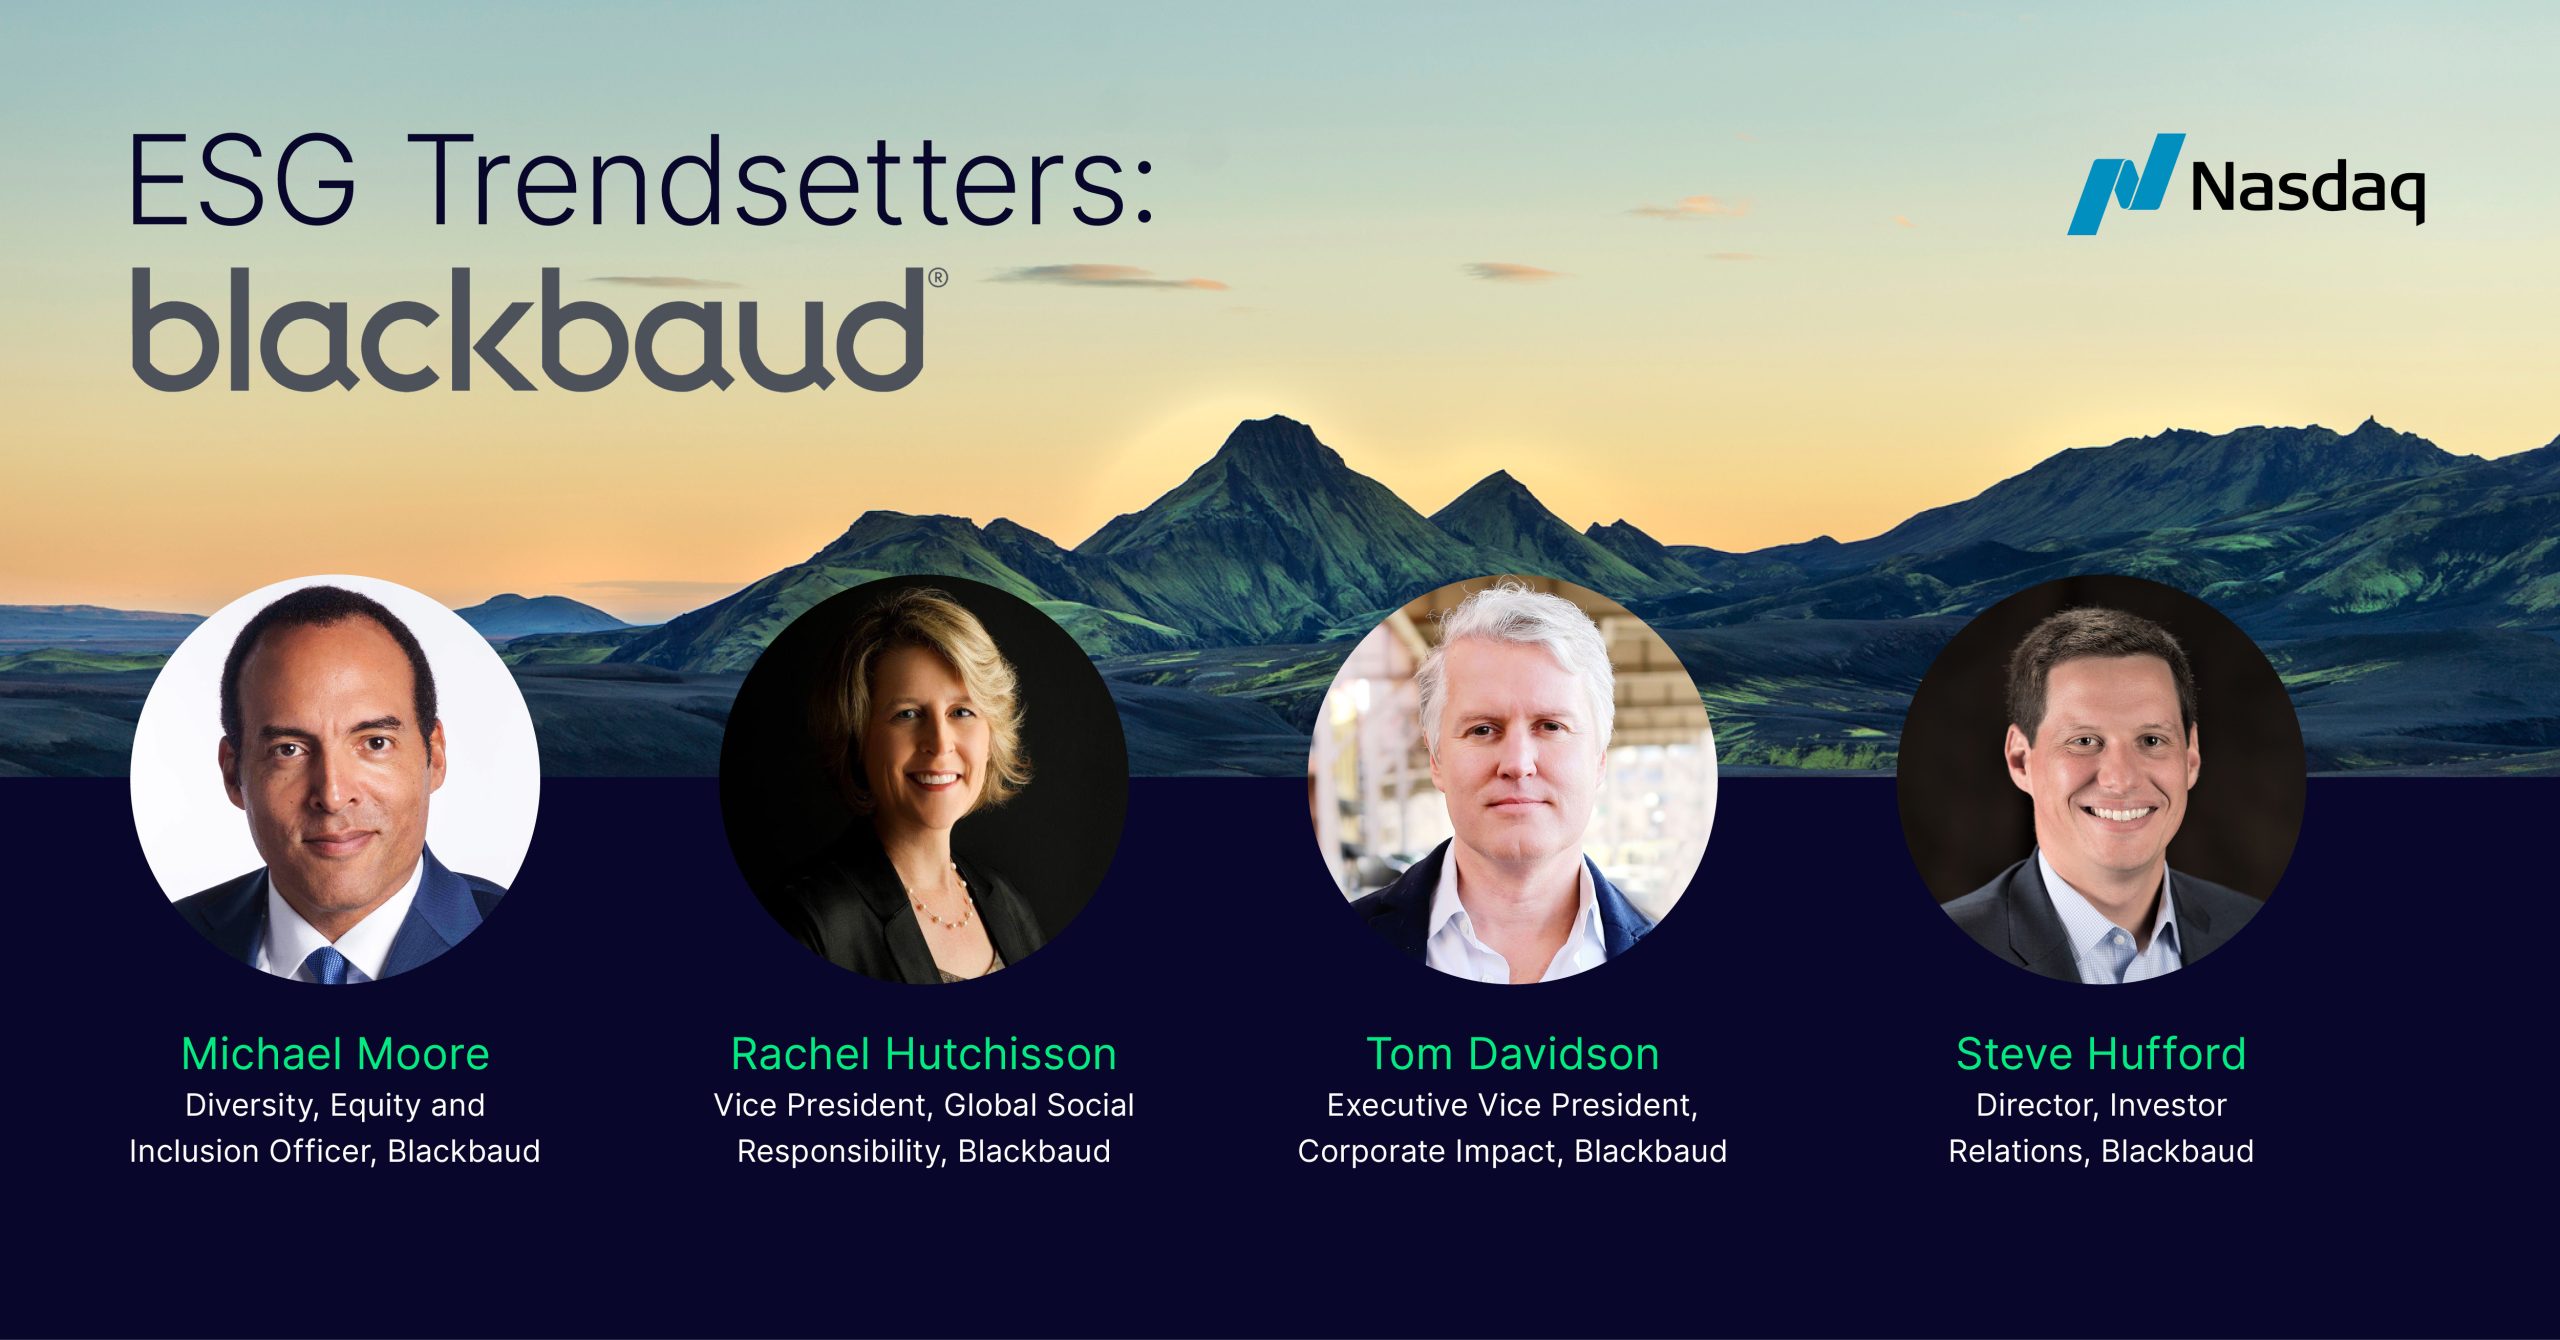 ESG Trendsetters: How Blackbaud Is Helping Companies Maximize Their Commitment to Social Good